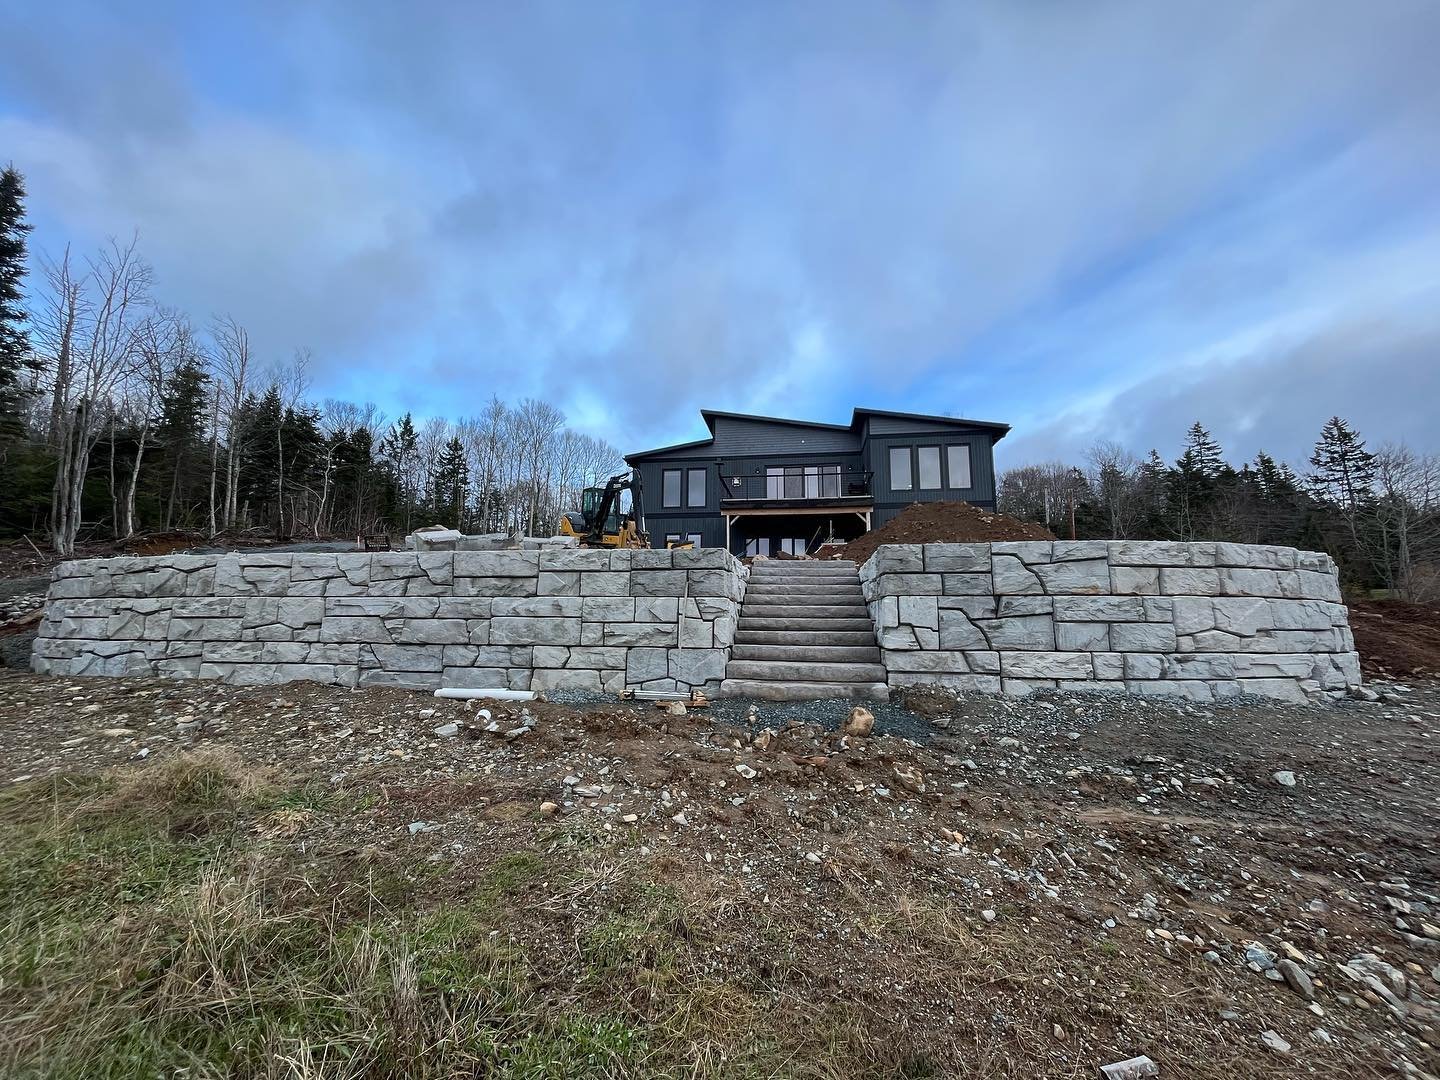 Finished off 2022 with this 120&rsquo; Verti-block wall and steps.

#retainingwall #steps #hardscape #landscaping #construction #contractor #brick #work #novascotia